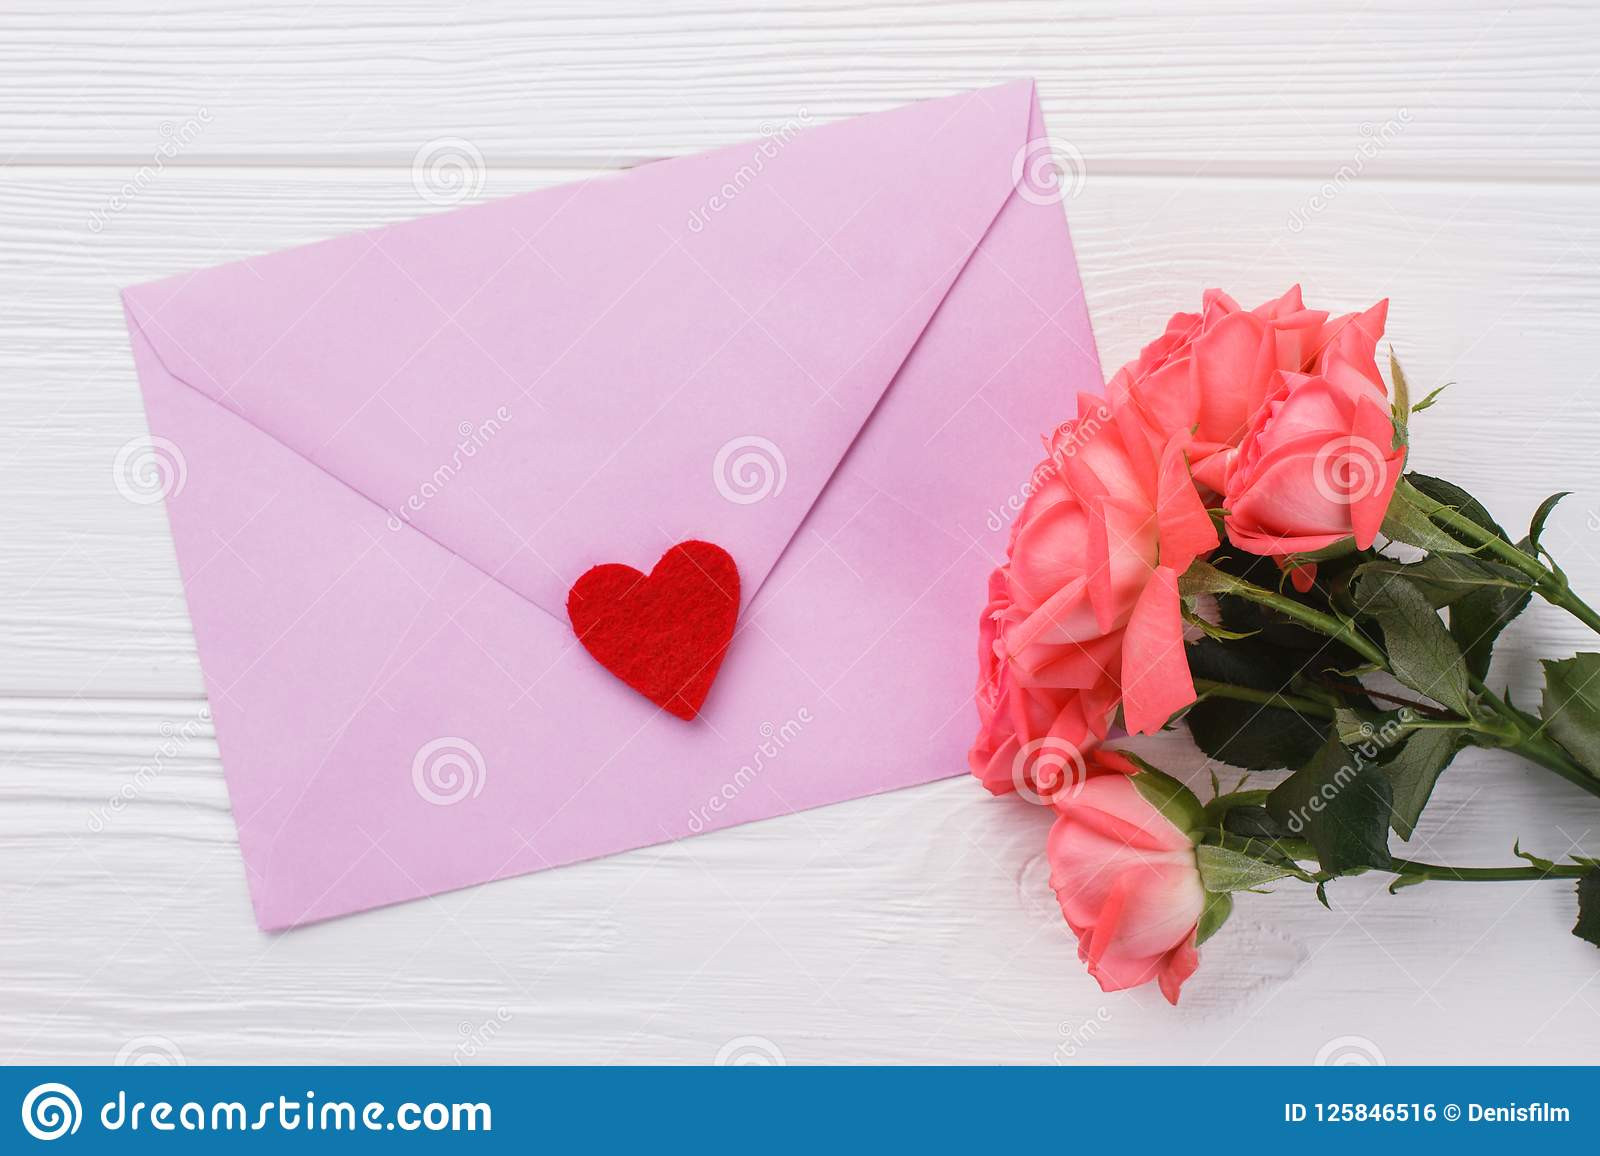 Romantic Gifts For Valentines Day
 Romantic Gift For Valentines Day Stock Image of